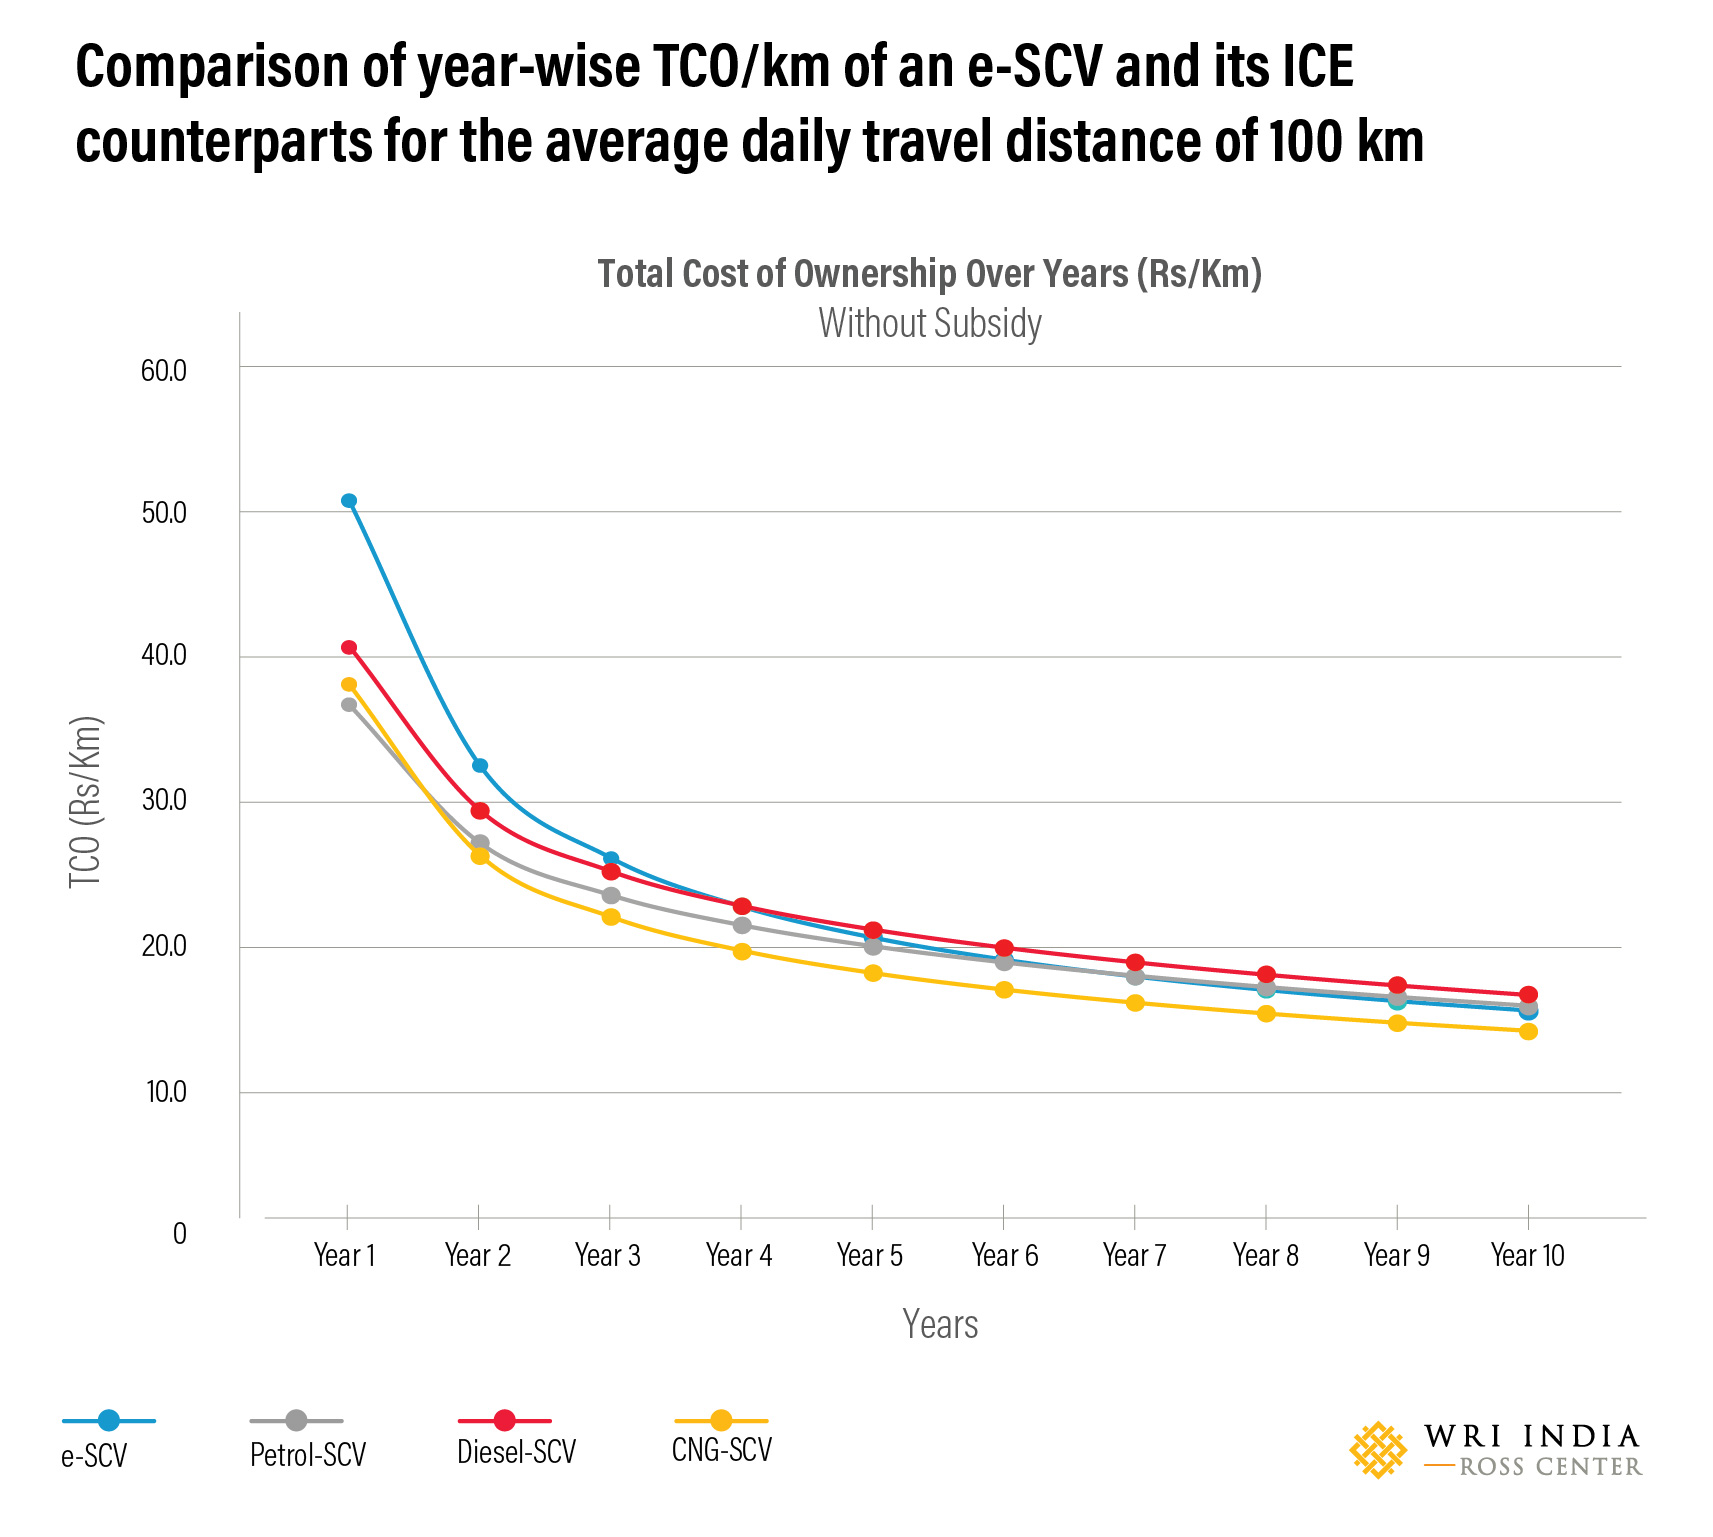 Comparison of year-wise TCO/km of an e-SCV and its ICE counterparts for the average daily travel distance of 100 km.